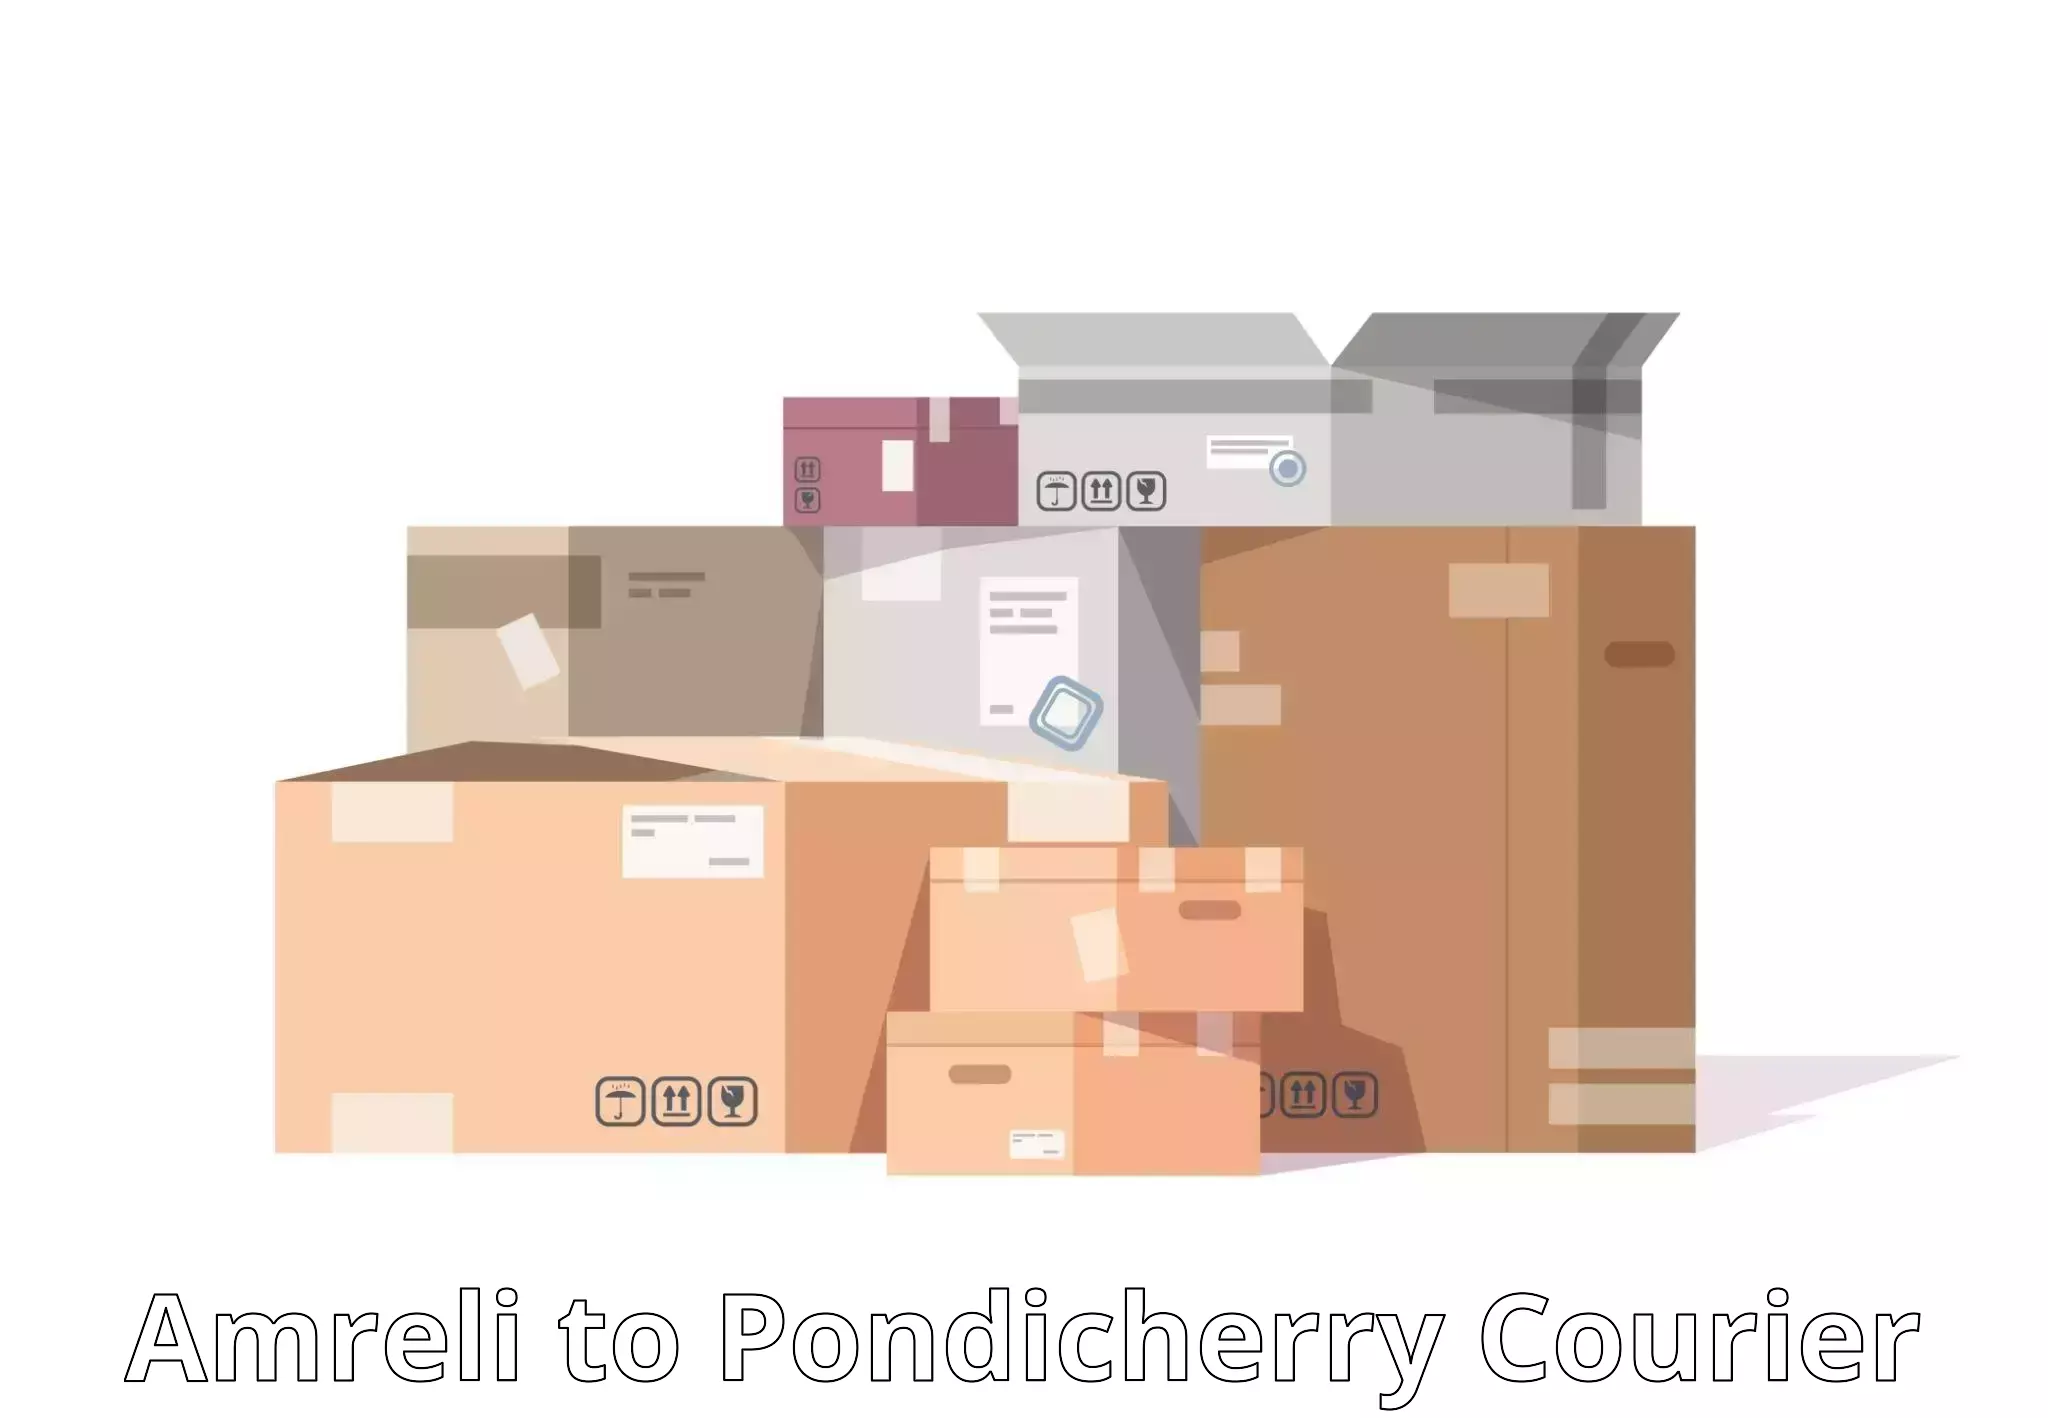 Package delivery network Amreli to Metttupalayam